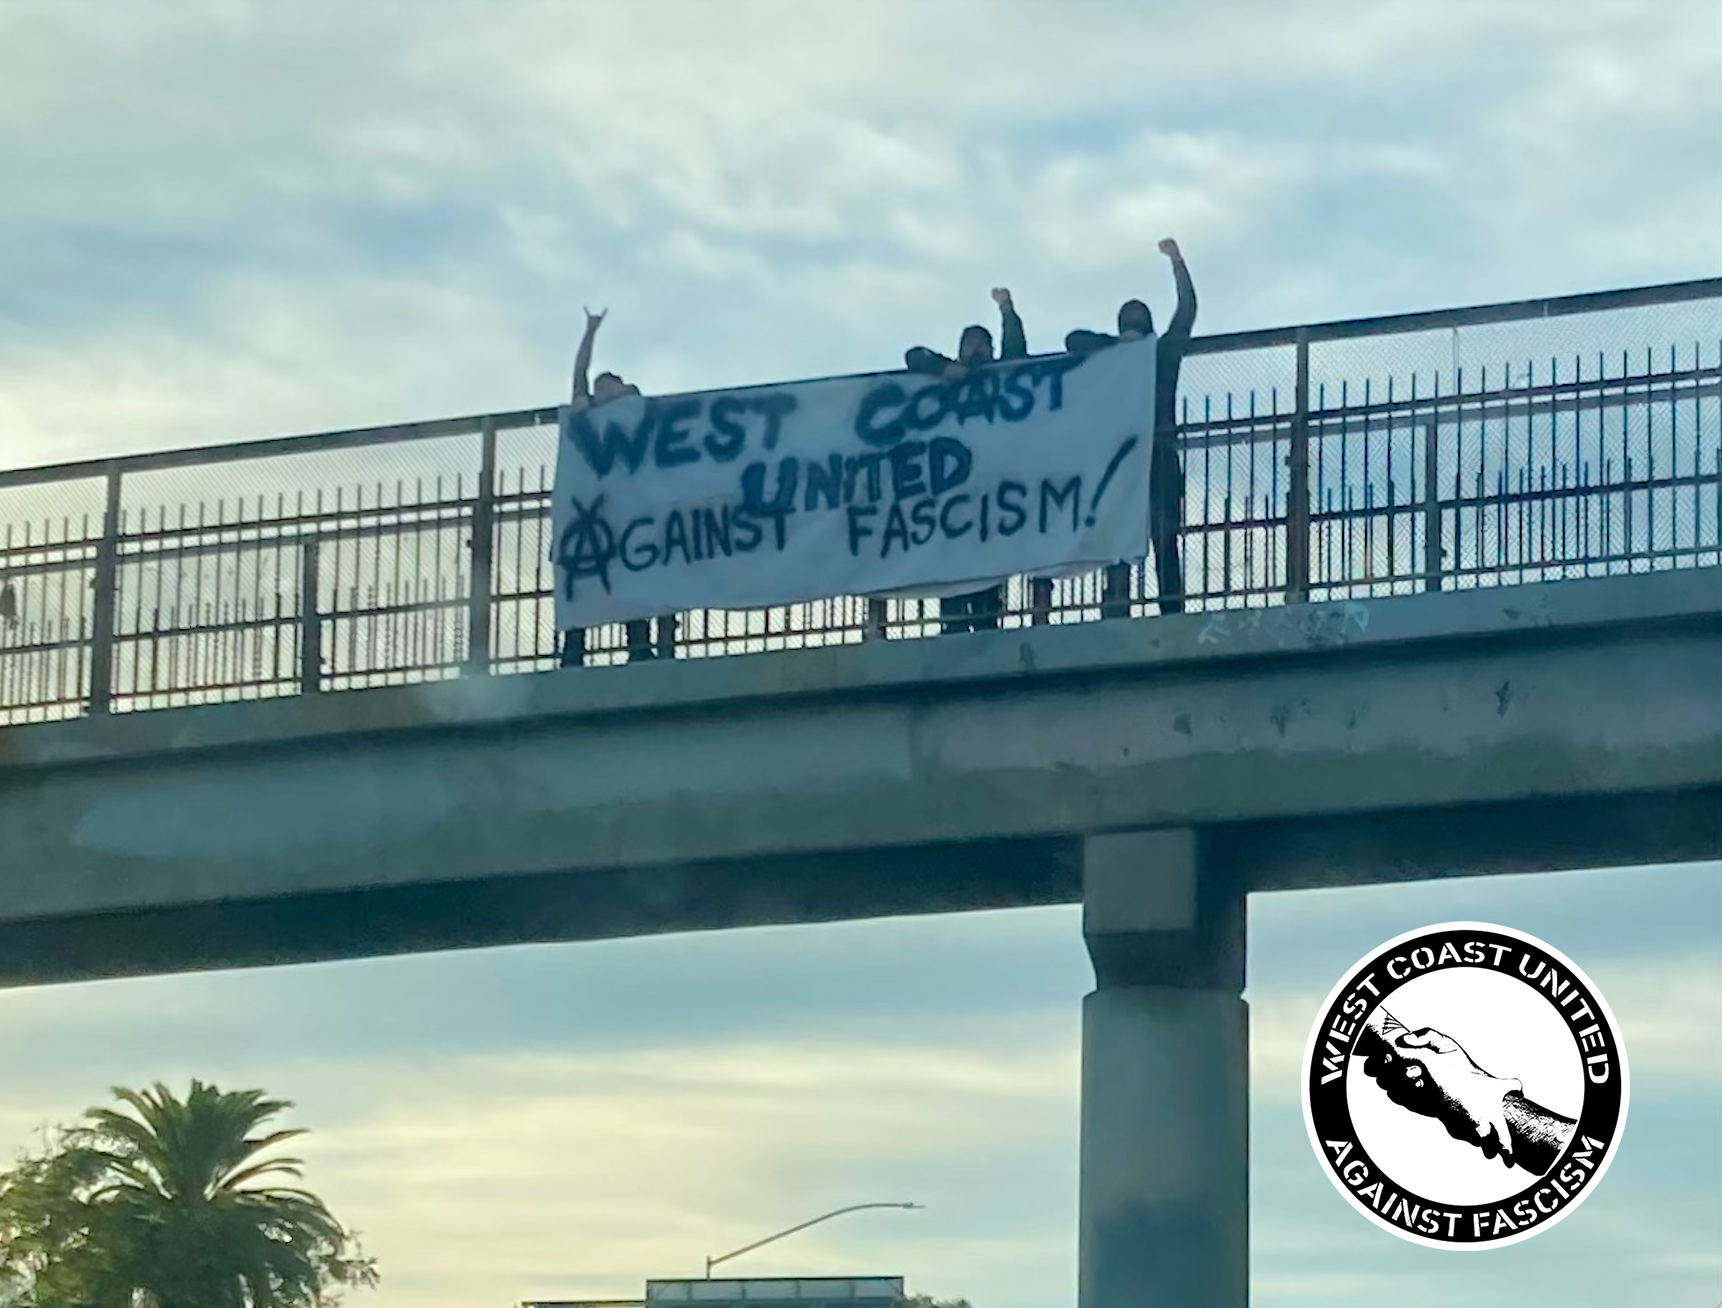 Three people stand on a bridge overpass with the sky behind them. Their fists are up. Infront of them hangs a sign that reads, "West Coast United Against Fascism!" The "a" in against is a circle A, used commonly to symbolize Anarchism.